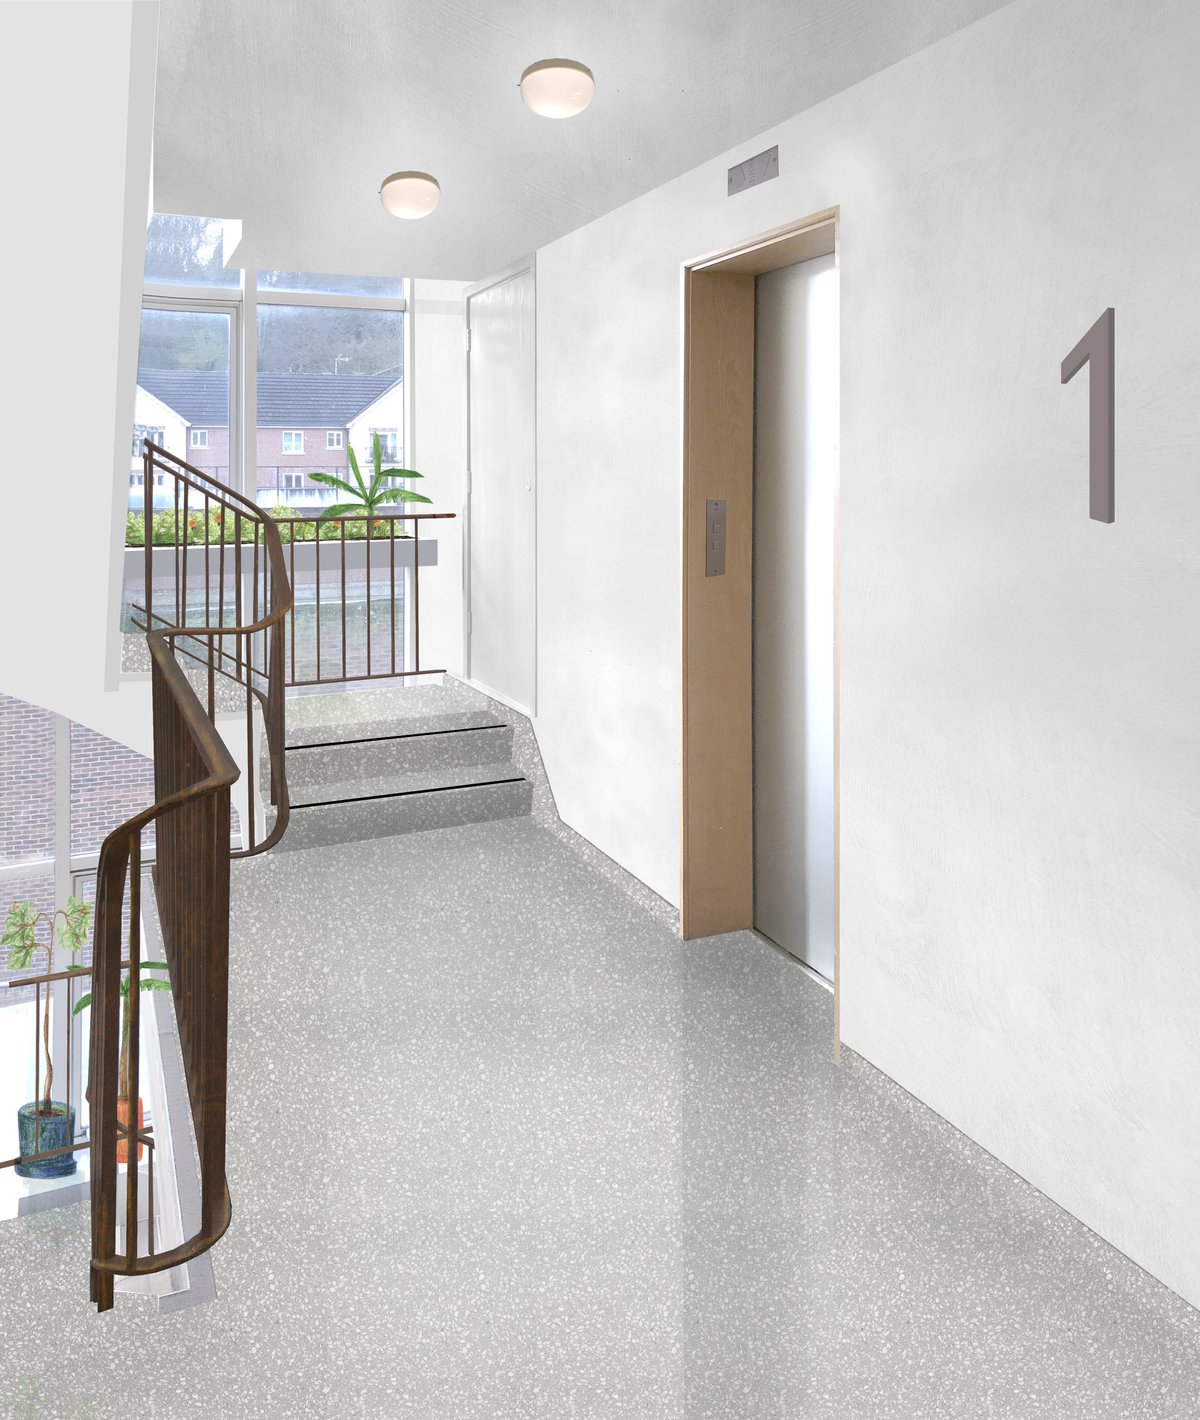 Quadrant House stair lobby proposed